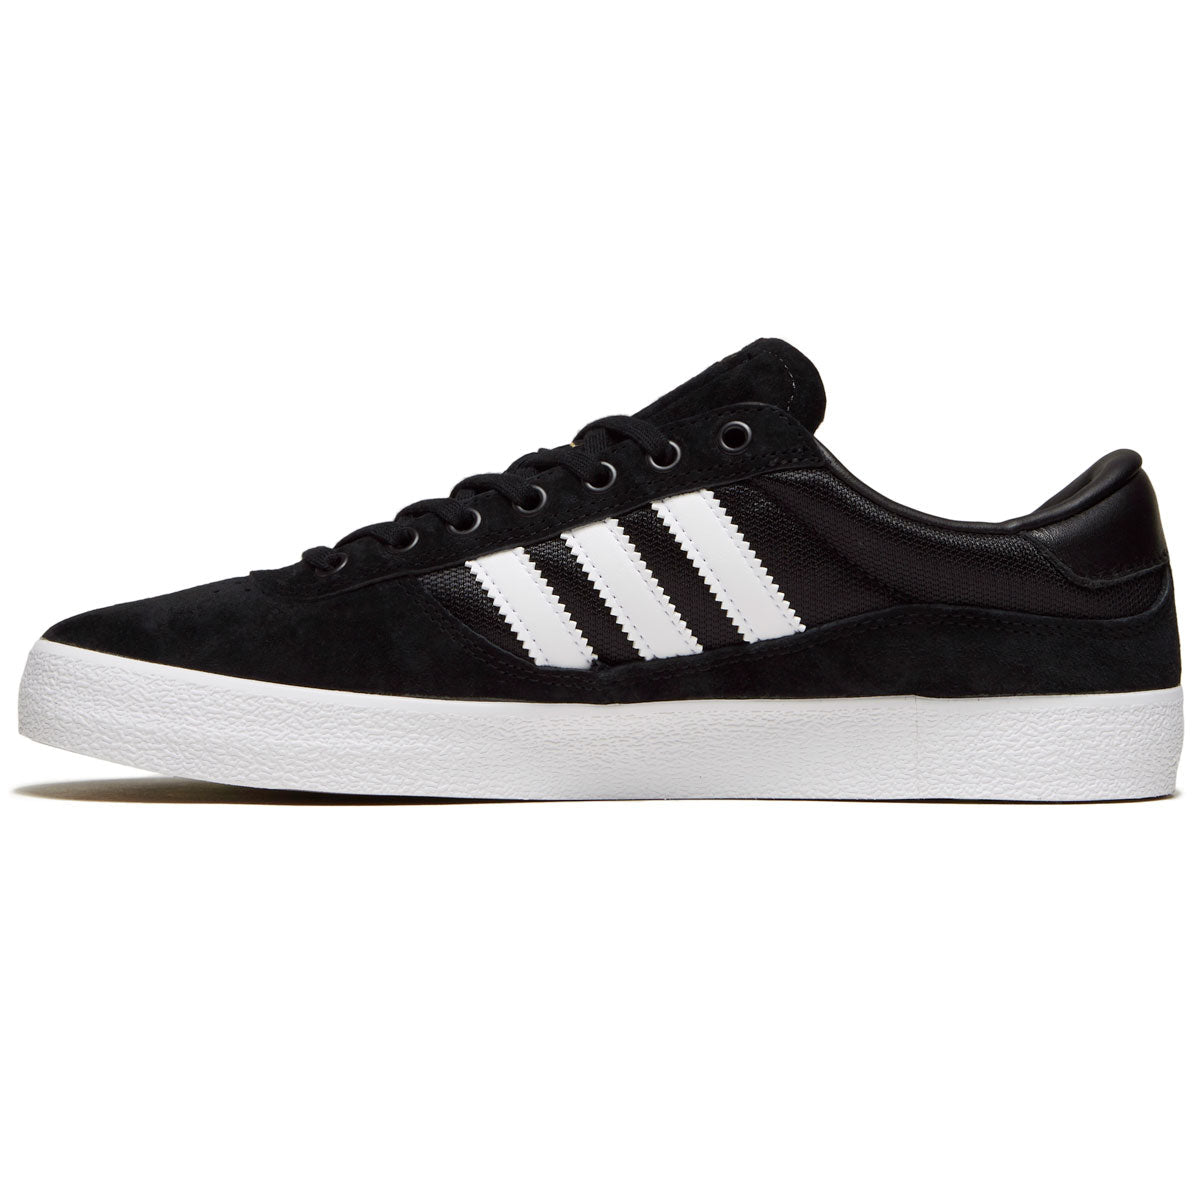 Adidas Puig Indoor Shoes - Black/White/Pulse Lime image 2